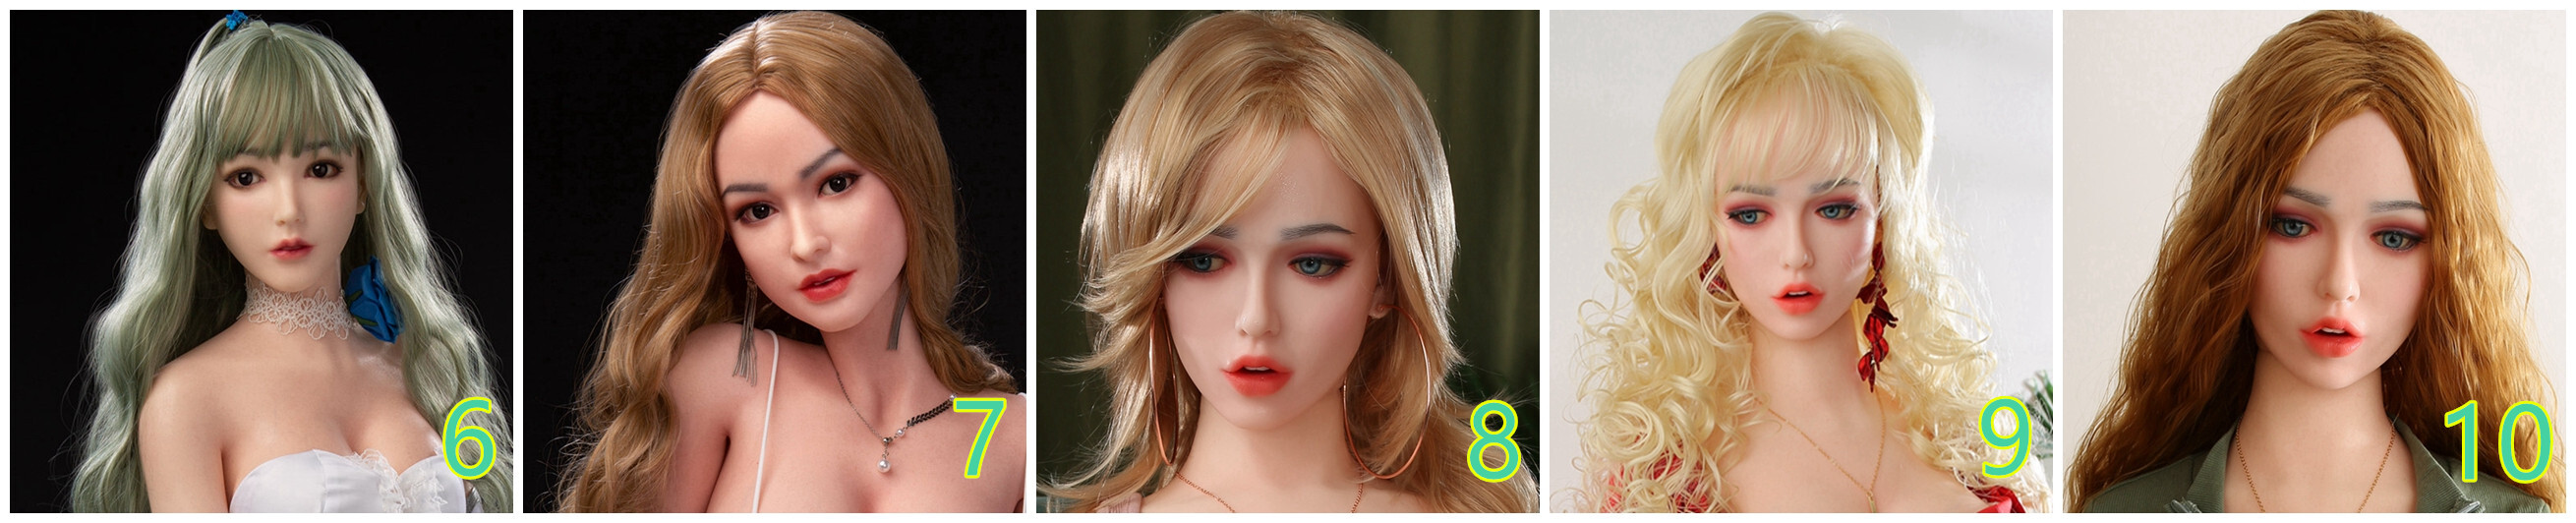 Wholesale Real Sexy Dolls World Life Size Sex Doll Lovely Asian Sexy Girl Future Doll 165cm Realistic Silicone Love Dolls Sex Doll Sexy Girl Future Doll 165cm Realistic Silicone Love Dolls